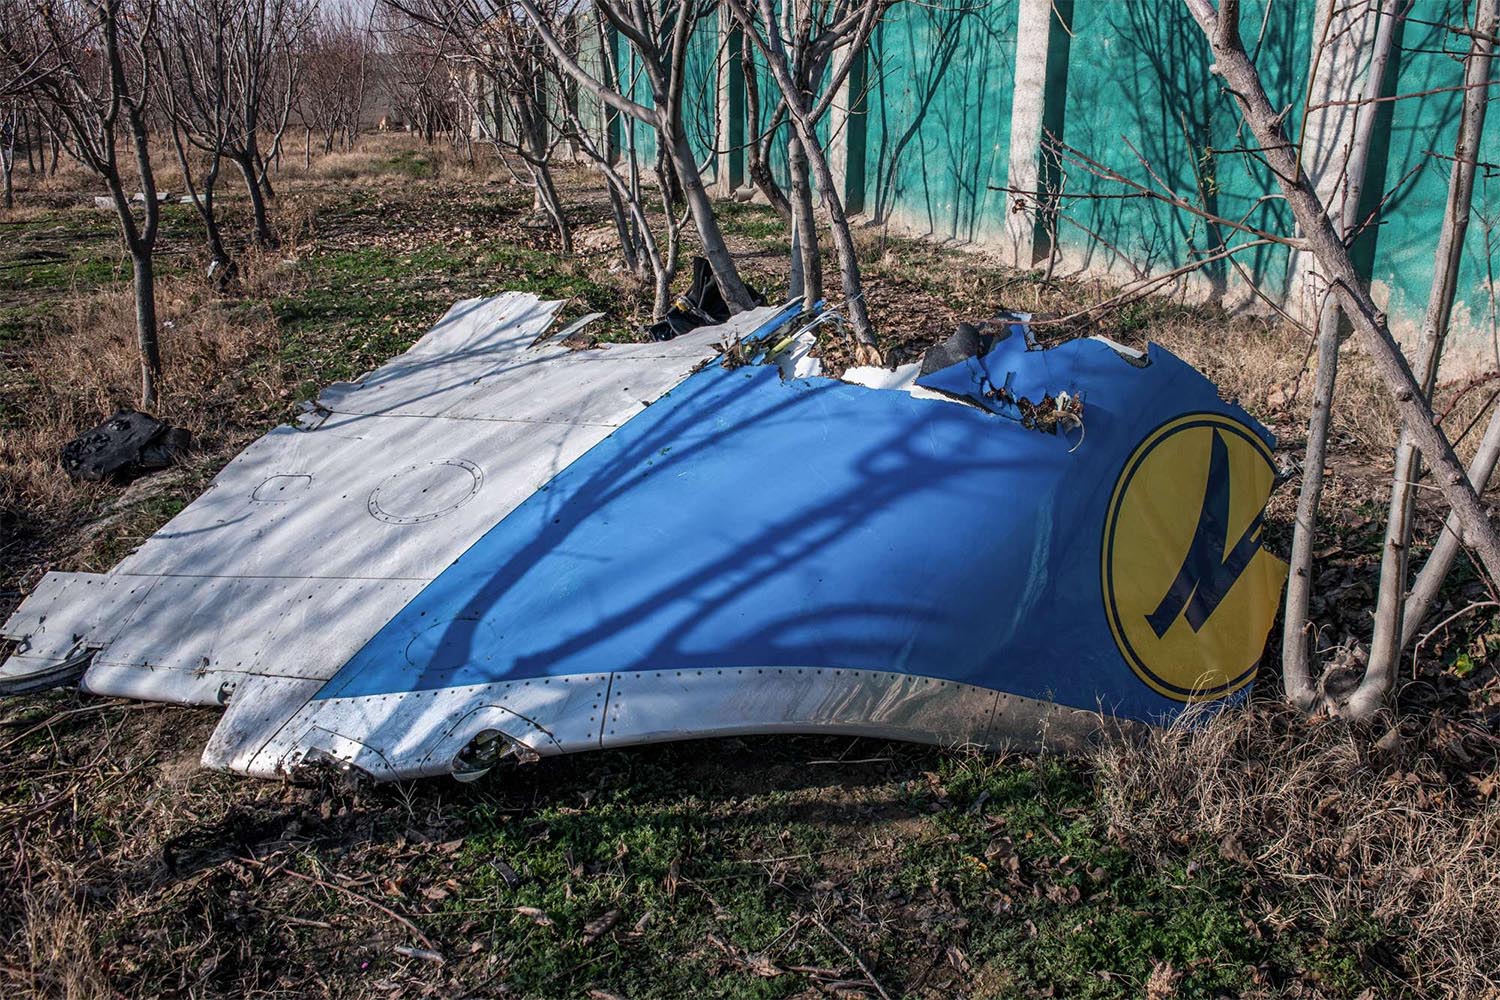 A piece of airplane fuselage at the scene, where a Ukrainian airplane carrying 176 people crashed